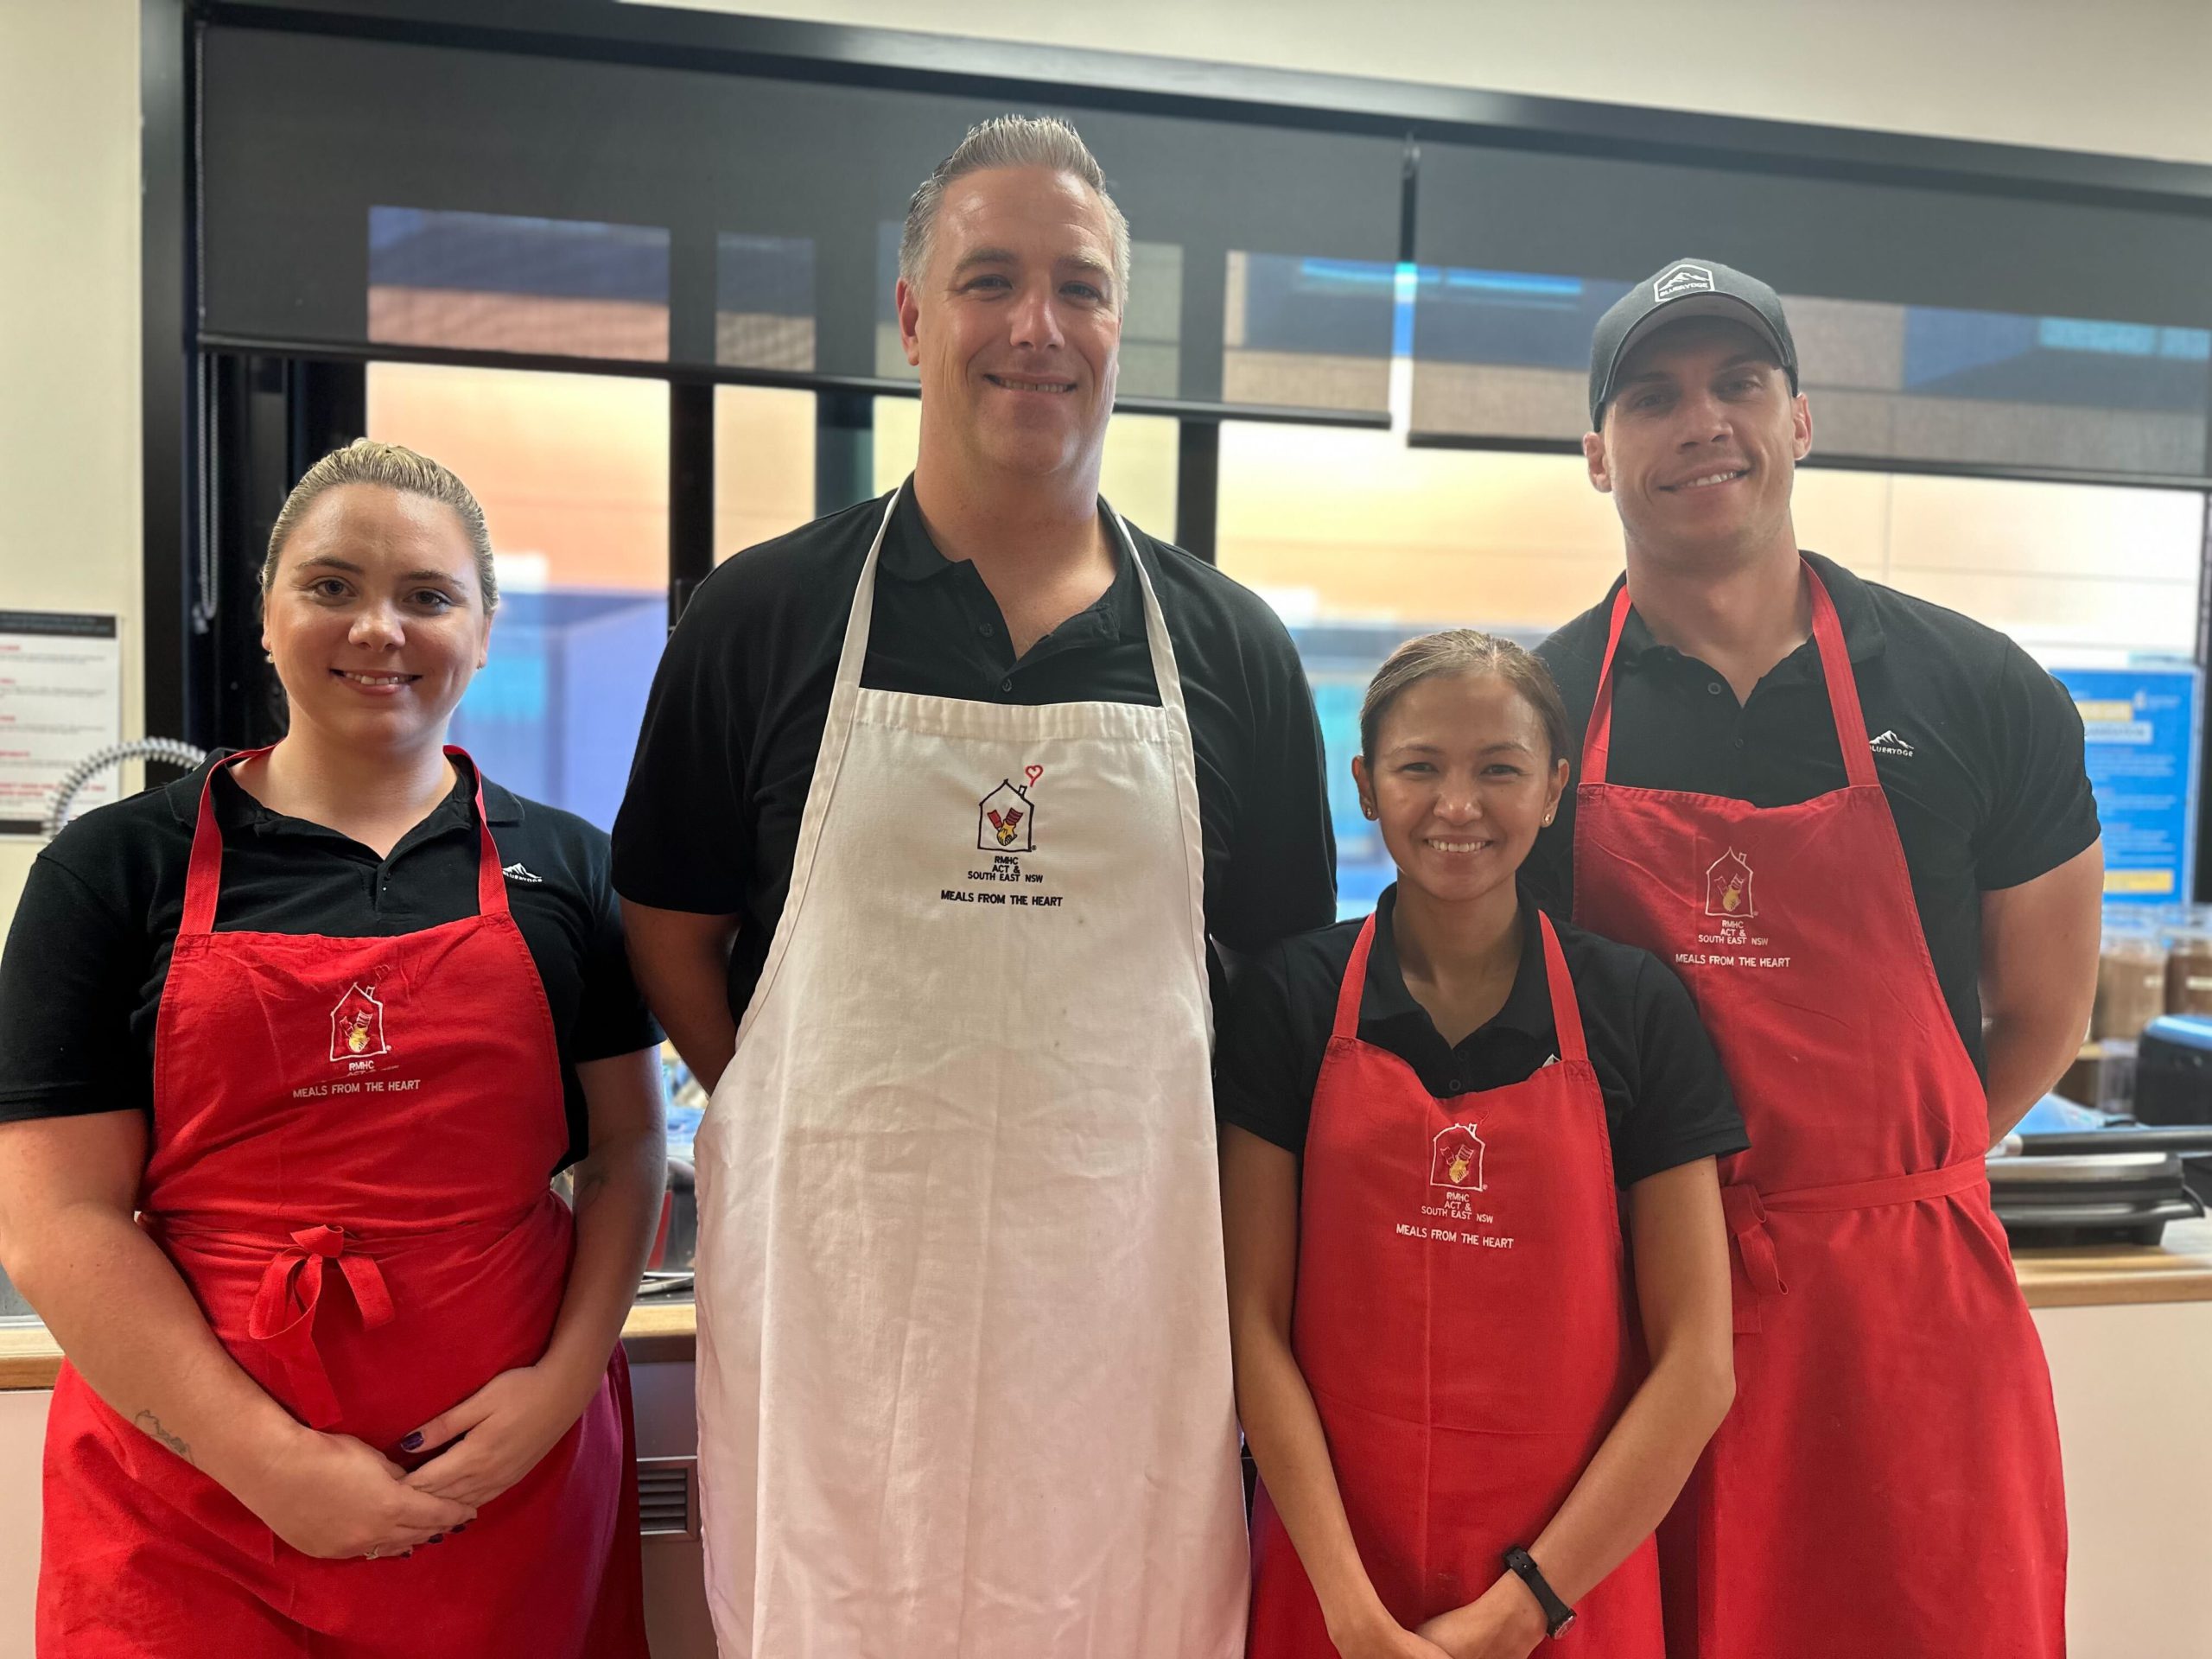 Bluerydge supports Ronald McDonald House Charities Meals from the Heart